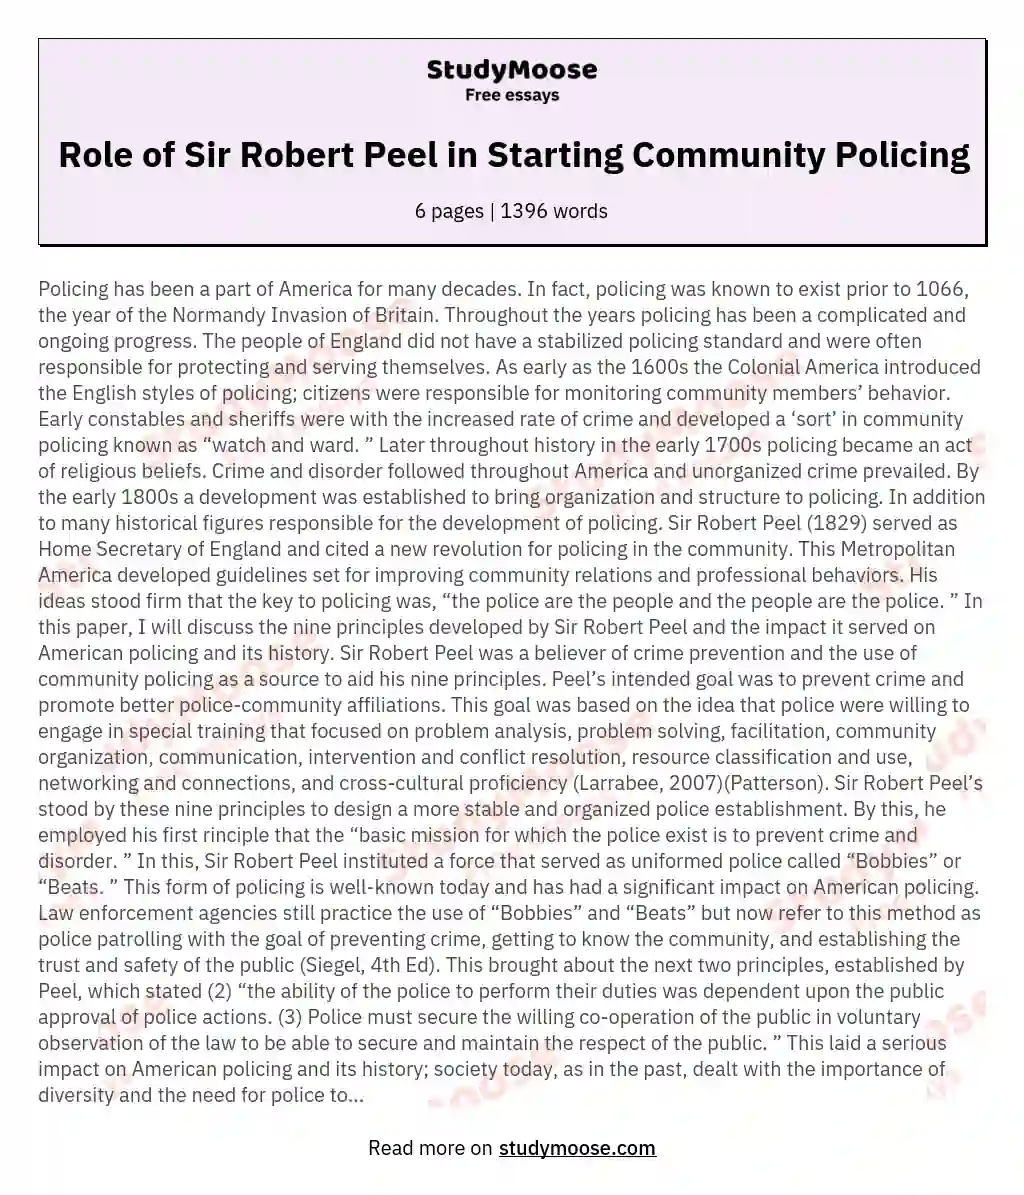 Role of Sir Robert Peel in Starting Community Policing essay